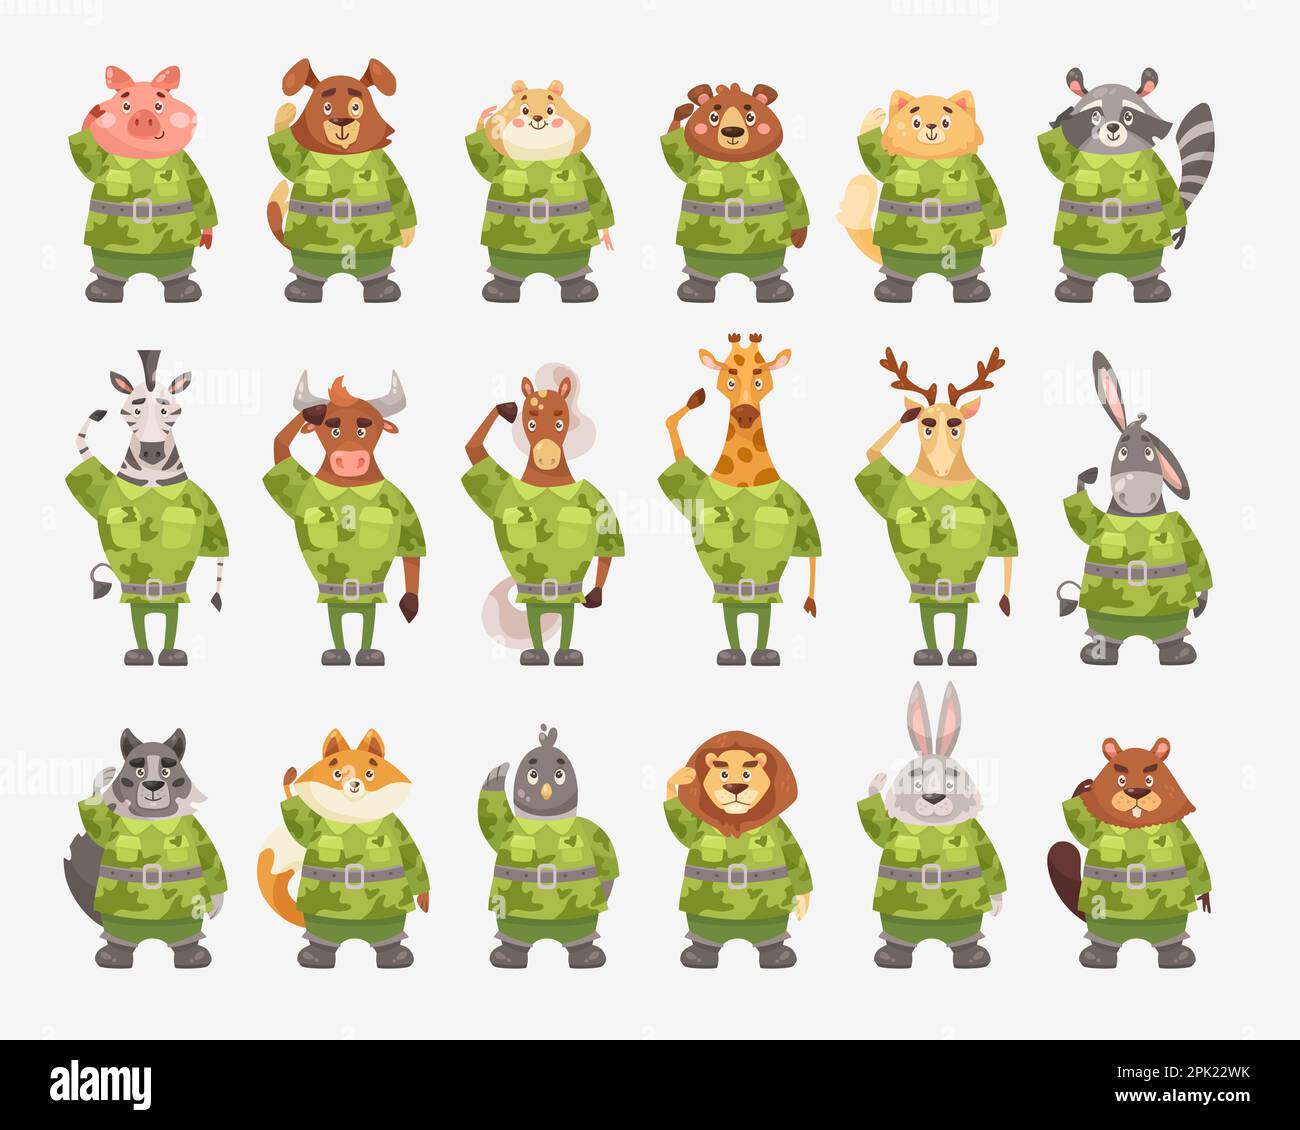 Cute animal soldiers in camouflage cartoon illustration set Stock Vector